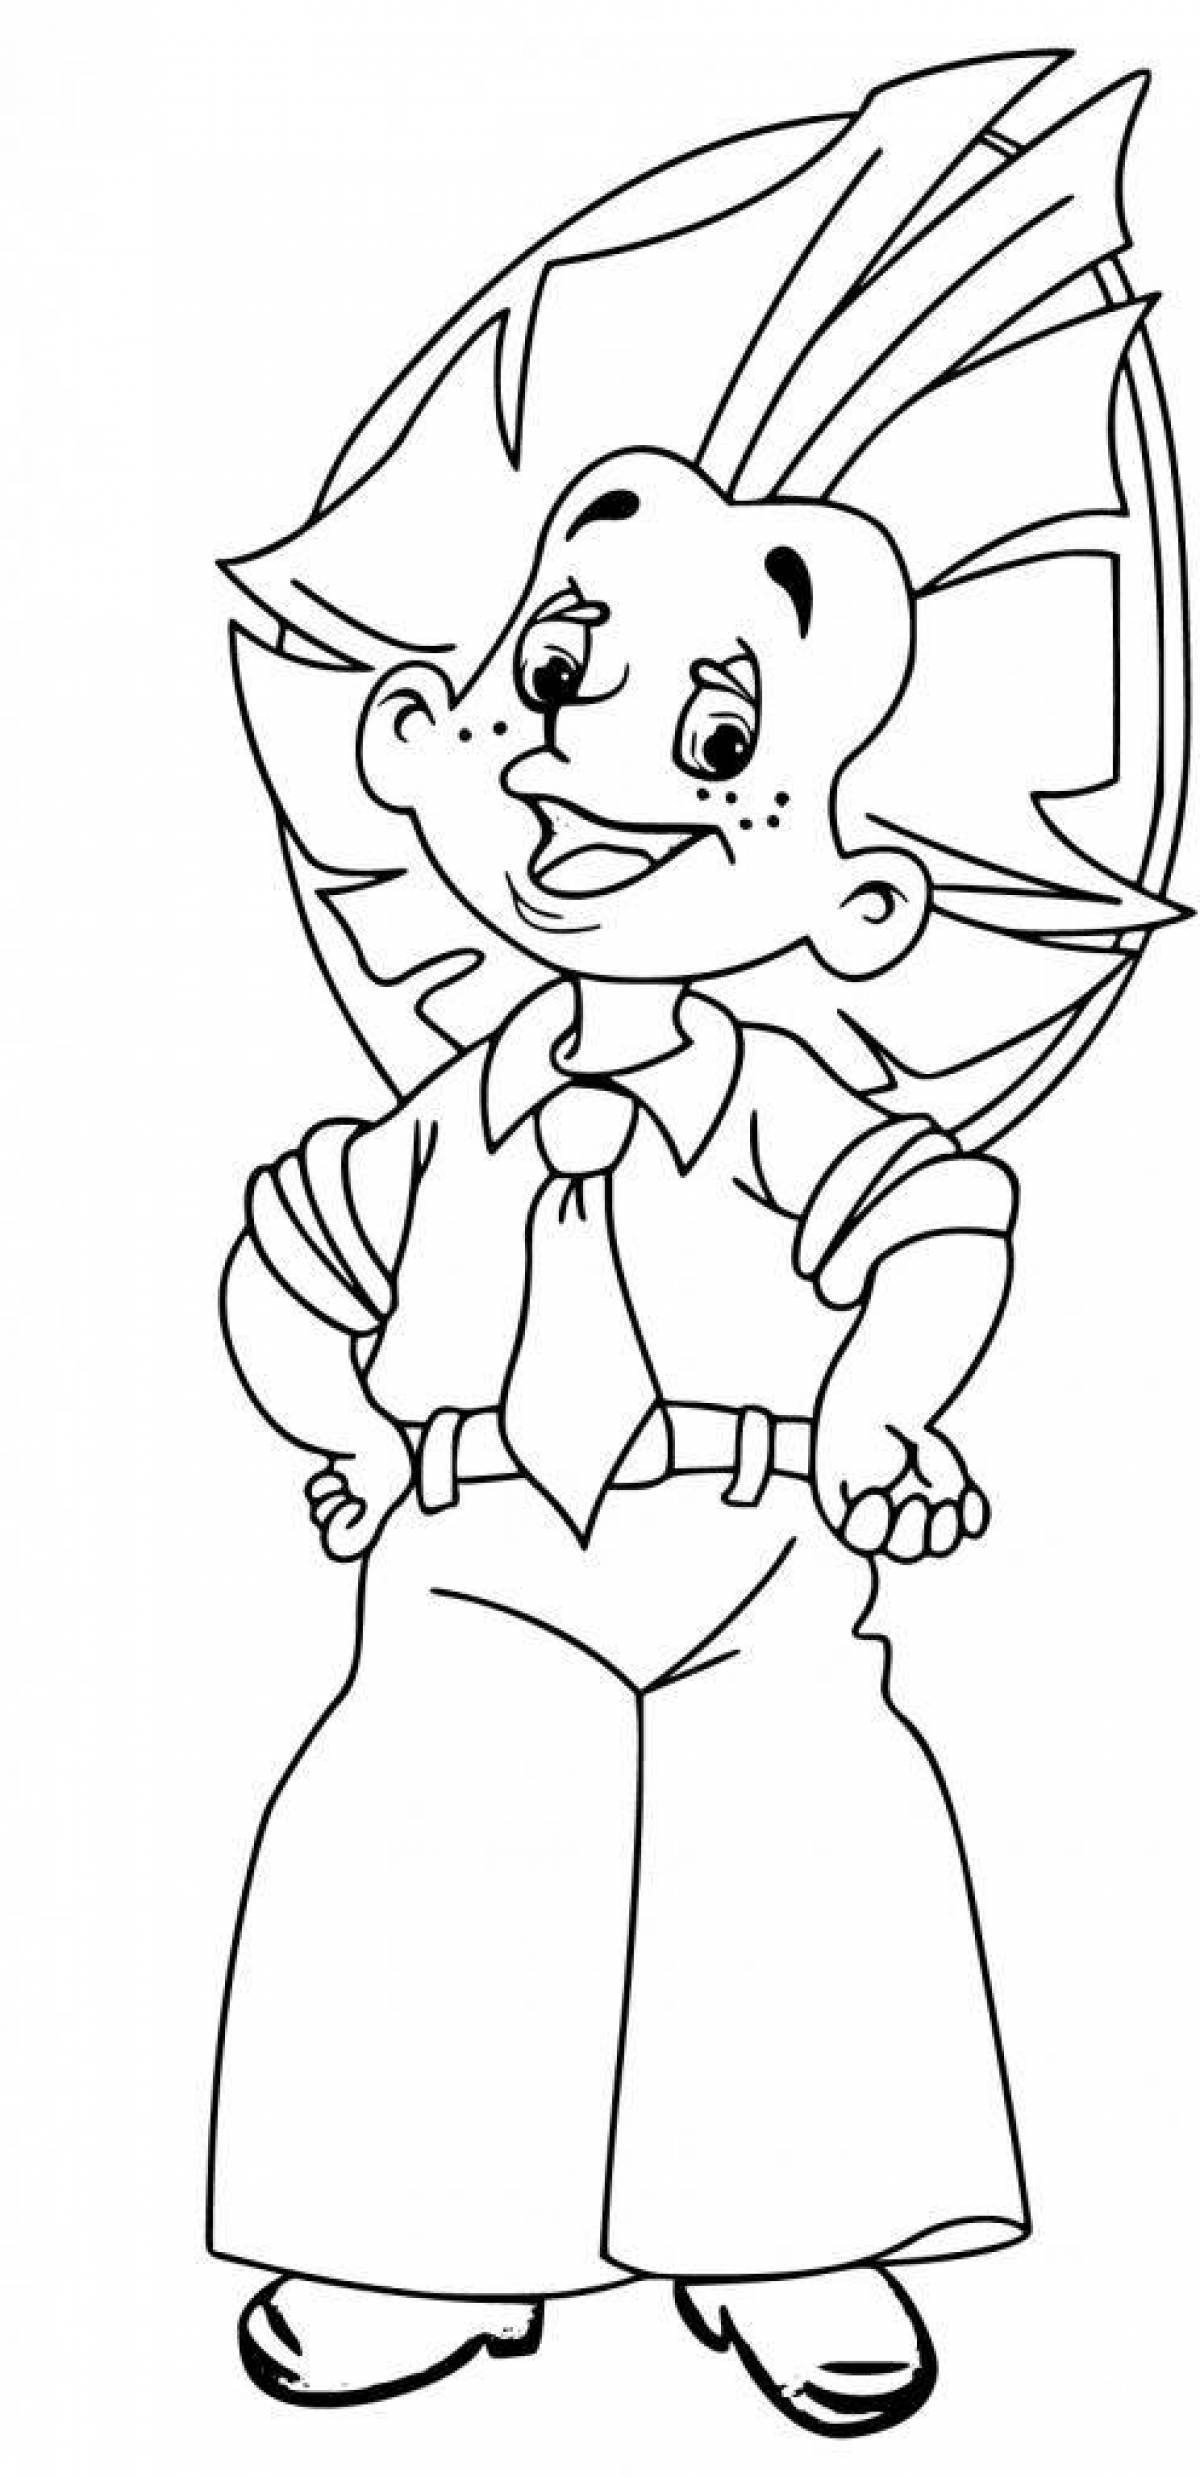 Color-explosion coloring page dunno and his friends